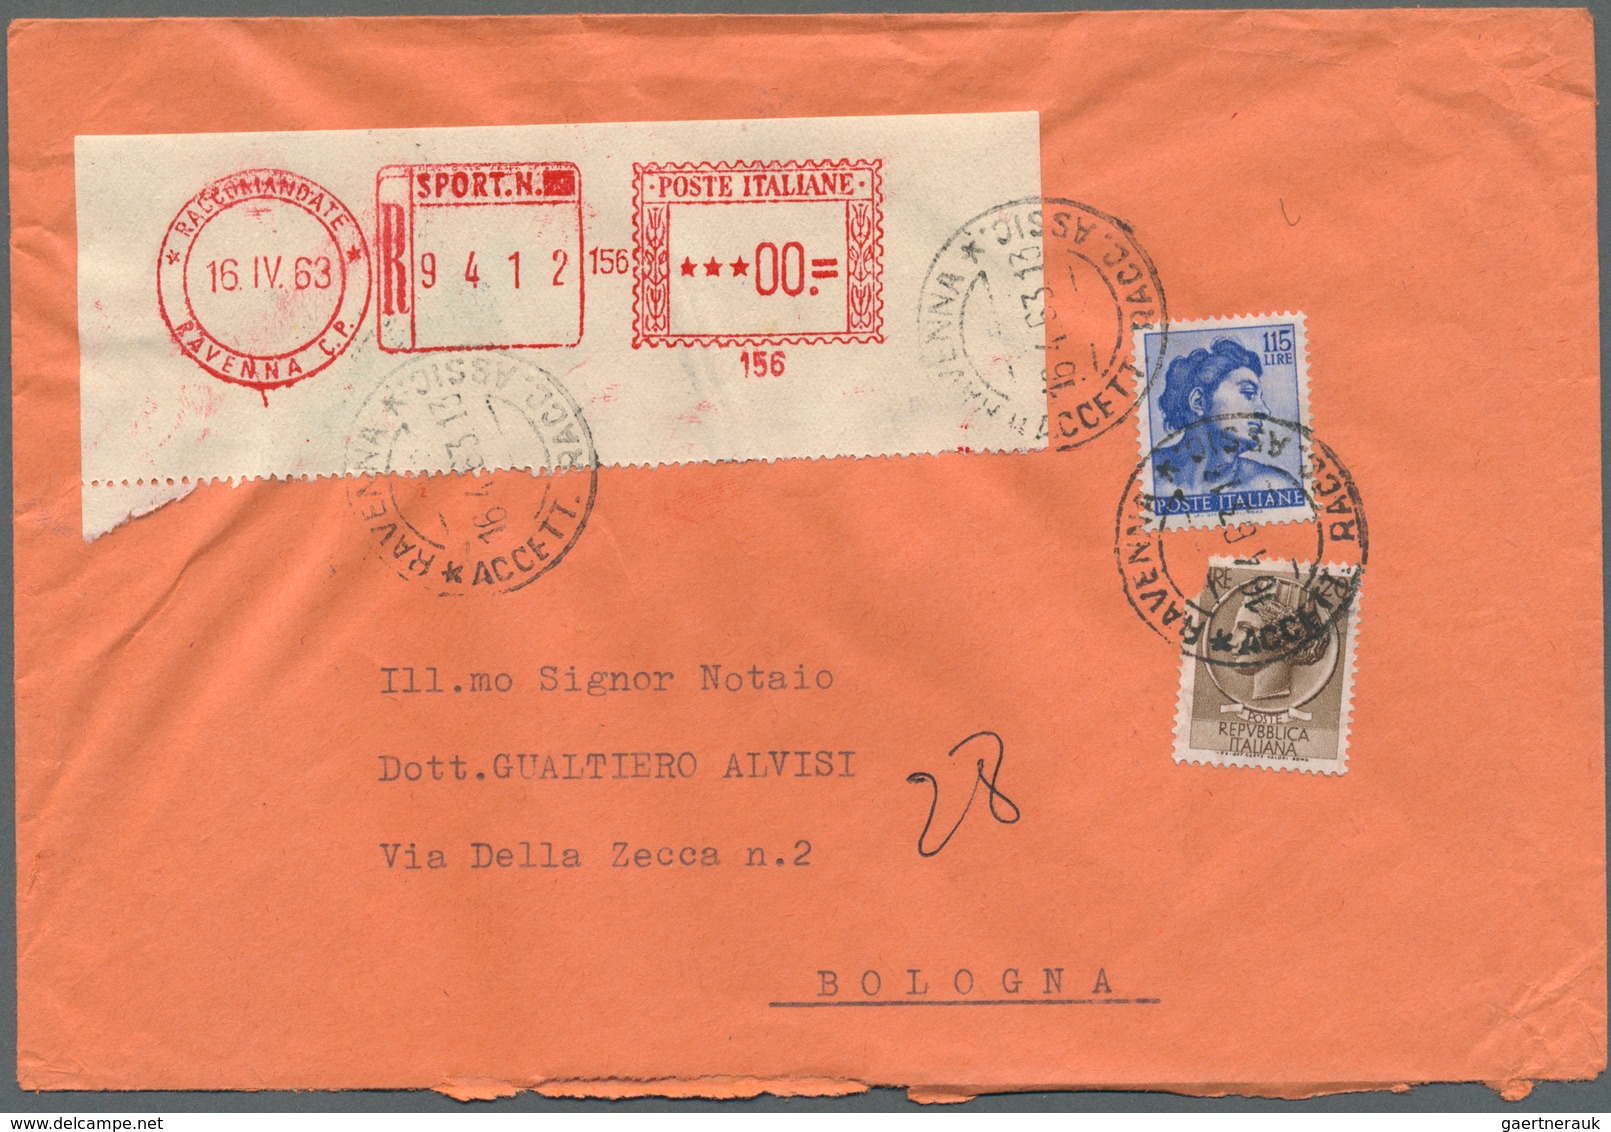 26974 Italien: 1902/1963 (ca.), holding of apprx. 350 commercial covers/cards, mainly postwar period and c